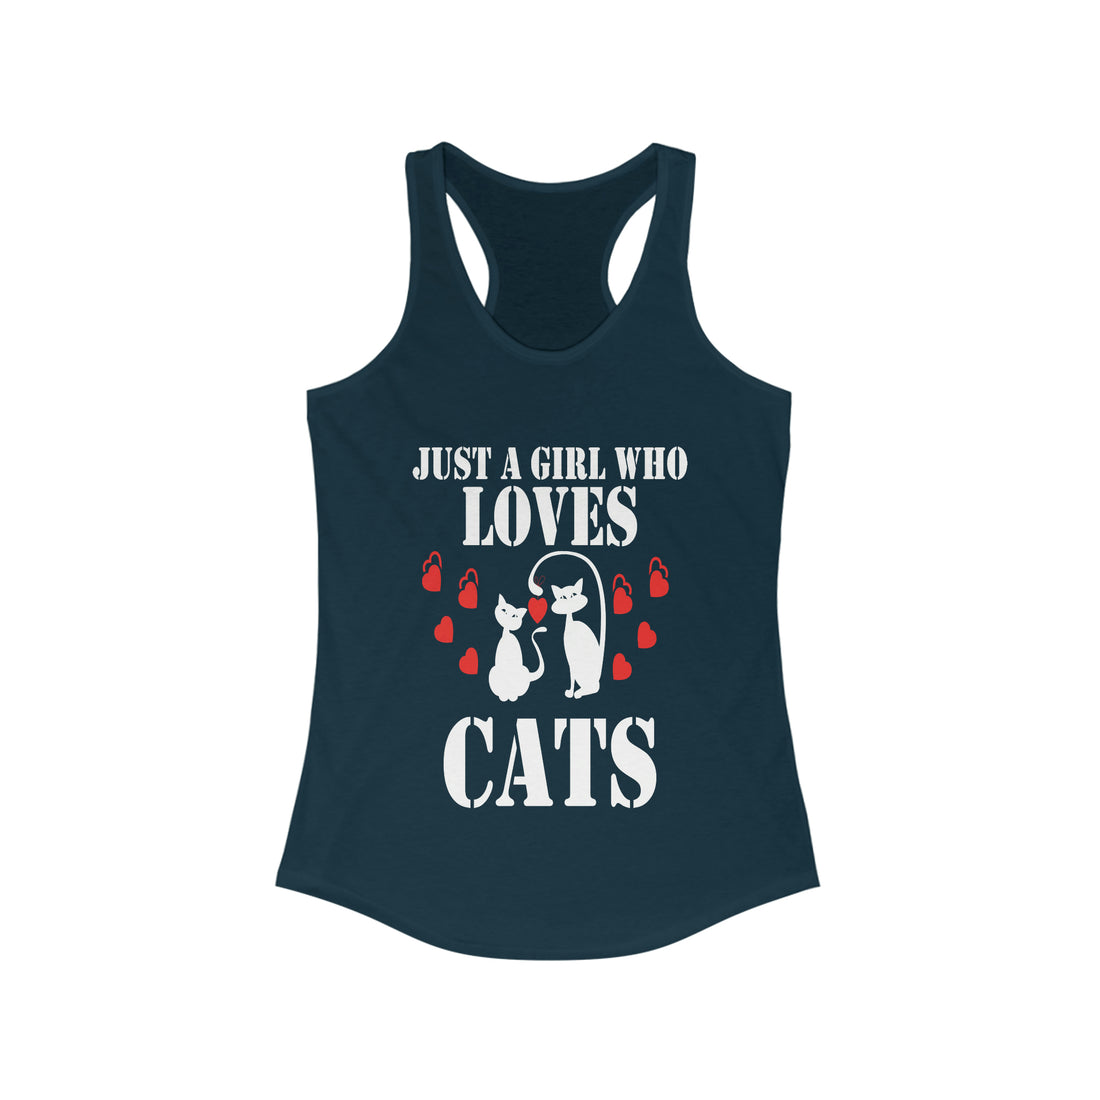 Just a Girl Who Loves Cats - Racerback Tank Top